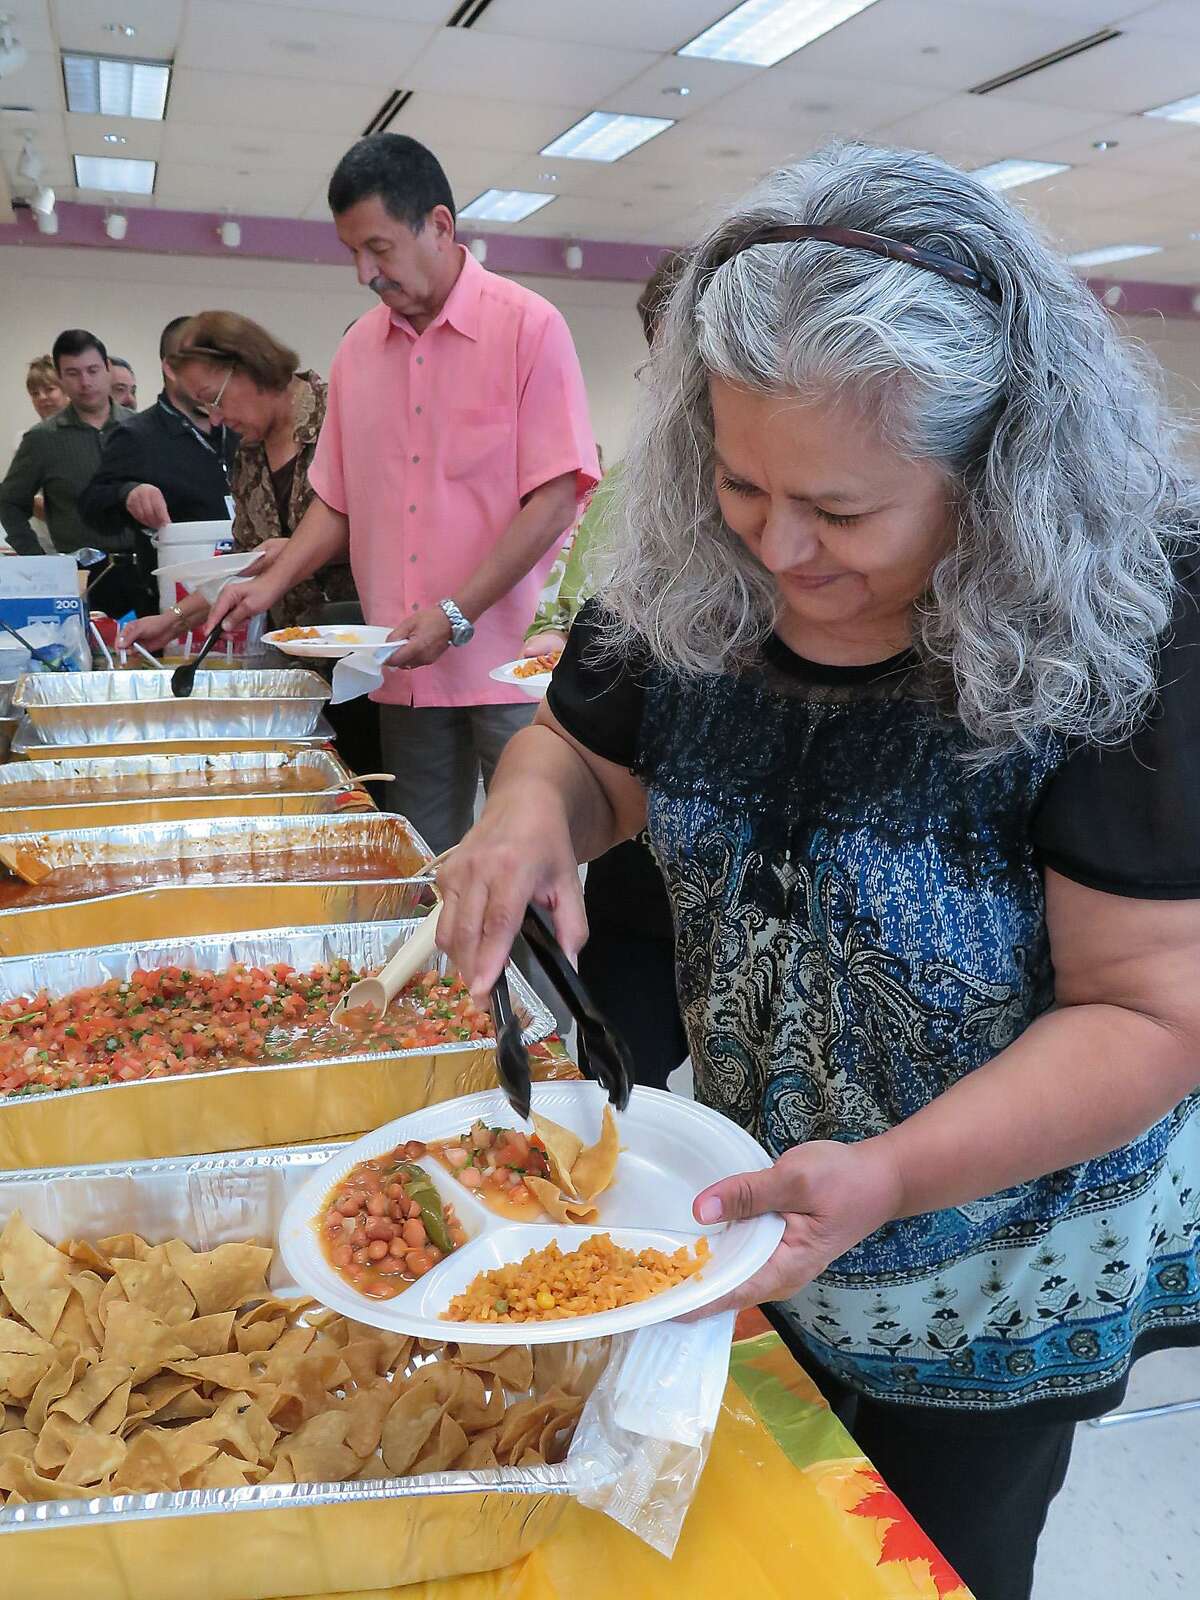 Josefina Luera adds some tortilla chips to her plate of rice and beans as she participates in the Laredo Regional Food Bank's 33rd Annual Rice and Beans Hunger Luncheon in commeration of World Food Day. The event was held Thursday at the Laredo Public Linrary Community Room.